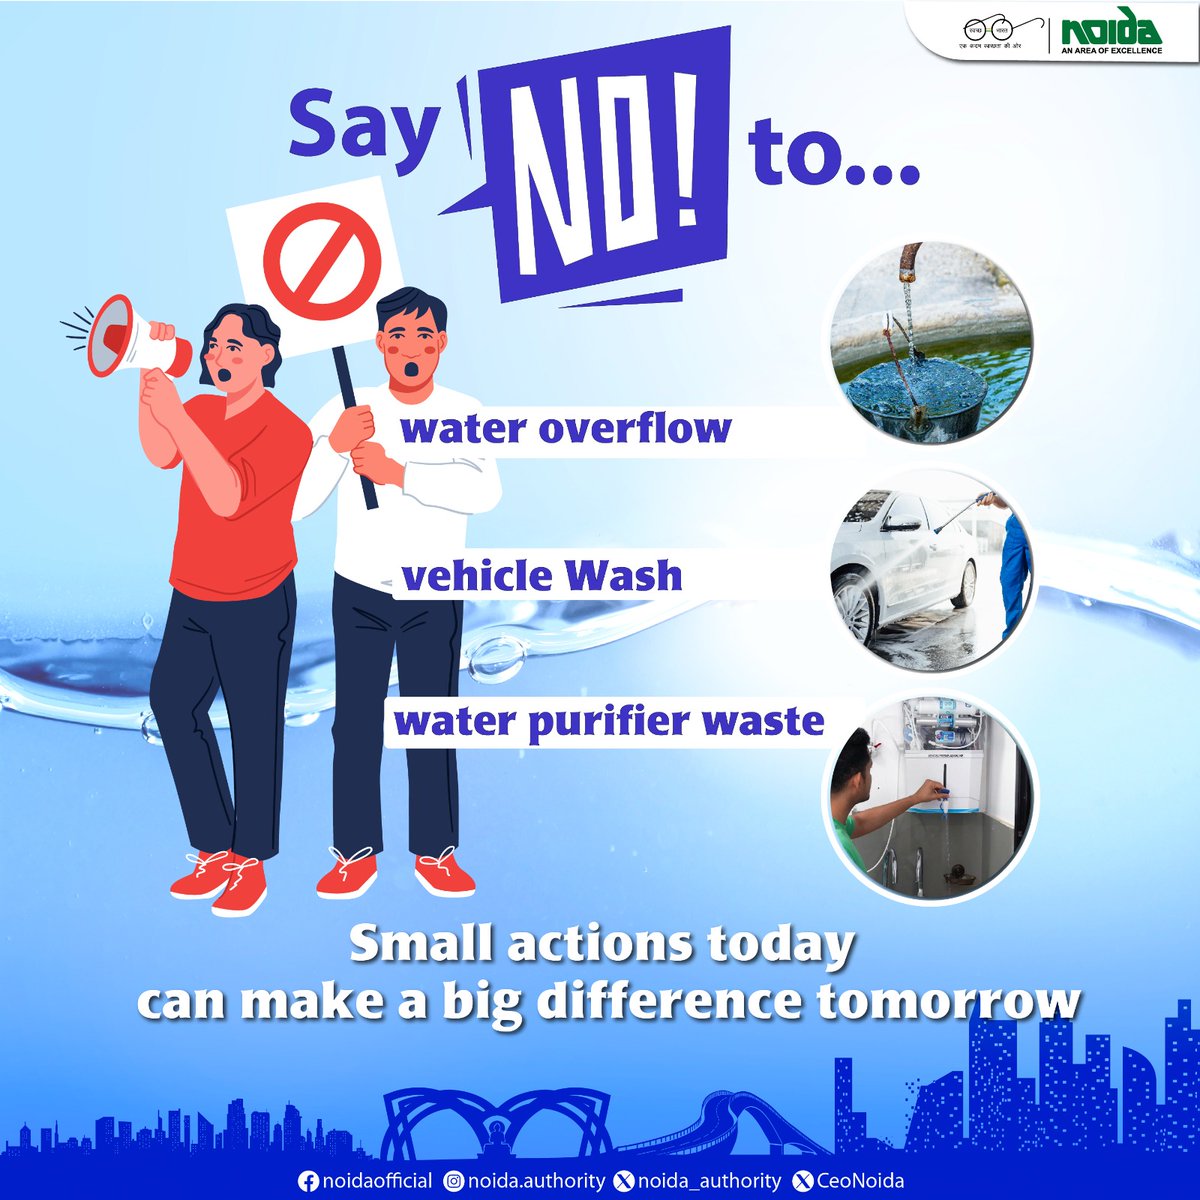 Every Drop Counts!💧
Let's unite to conserve water and safeguard our future. Today's small actions can create a big impact tomorrow. 
Join the movement! 🌍
#NoidaAuthority 
#JalSanchay #SaveWater
#WaterConservation 
#EveryDropCounts
#SustainableLiving
#ProtectOurPlanet